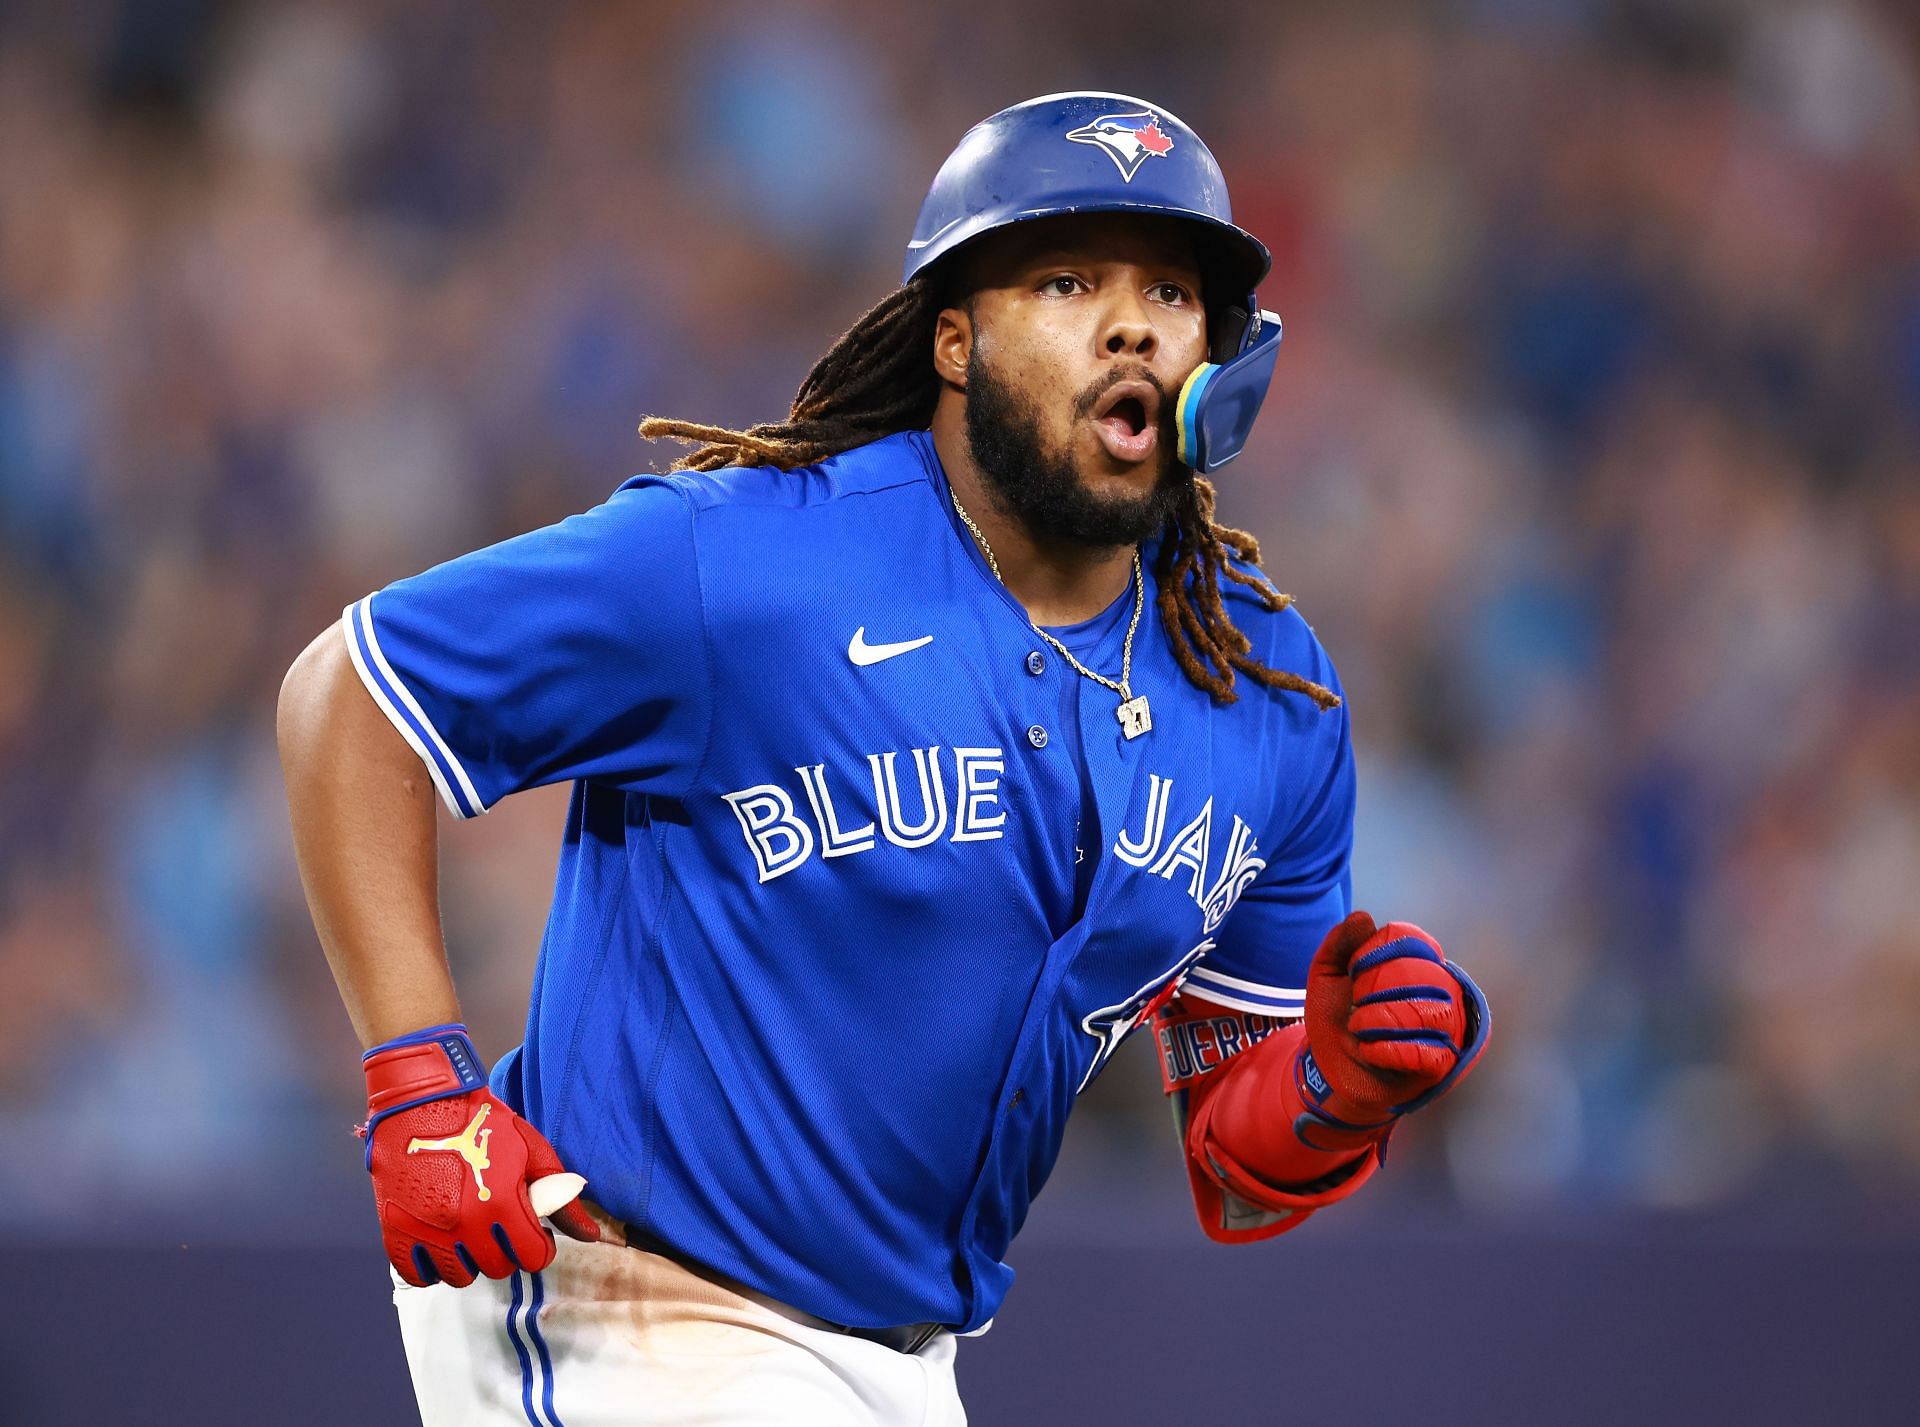 Vladimir Guerrero Jr. of the Toronto Blue Jays reacts after hitting a two-run home run.